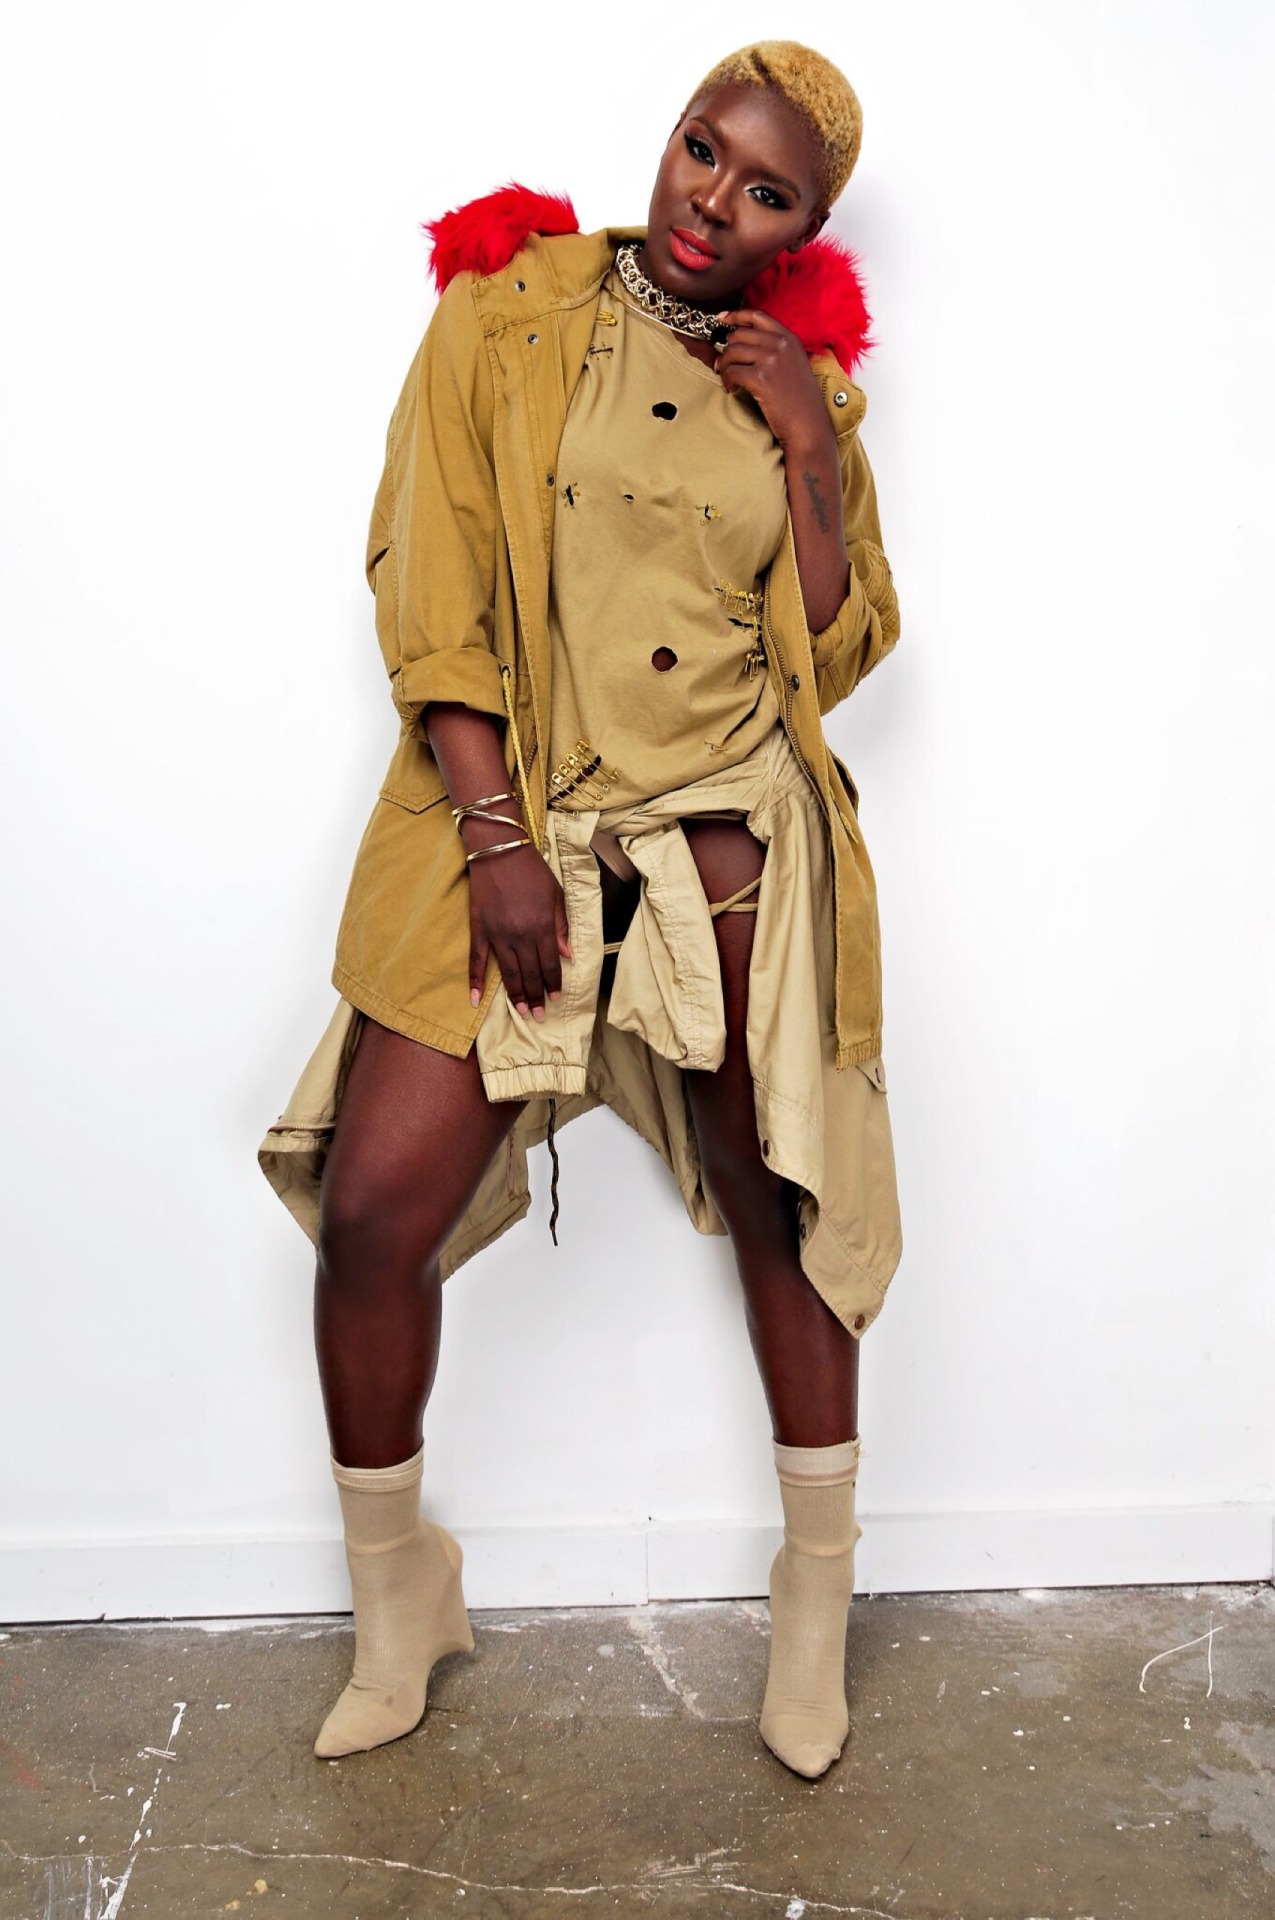 lexi-love-child:  blackfashion:  DEEZY SZN by Demi Dorsey  2nd, 4th, 7th, and 8th